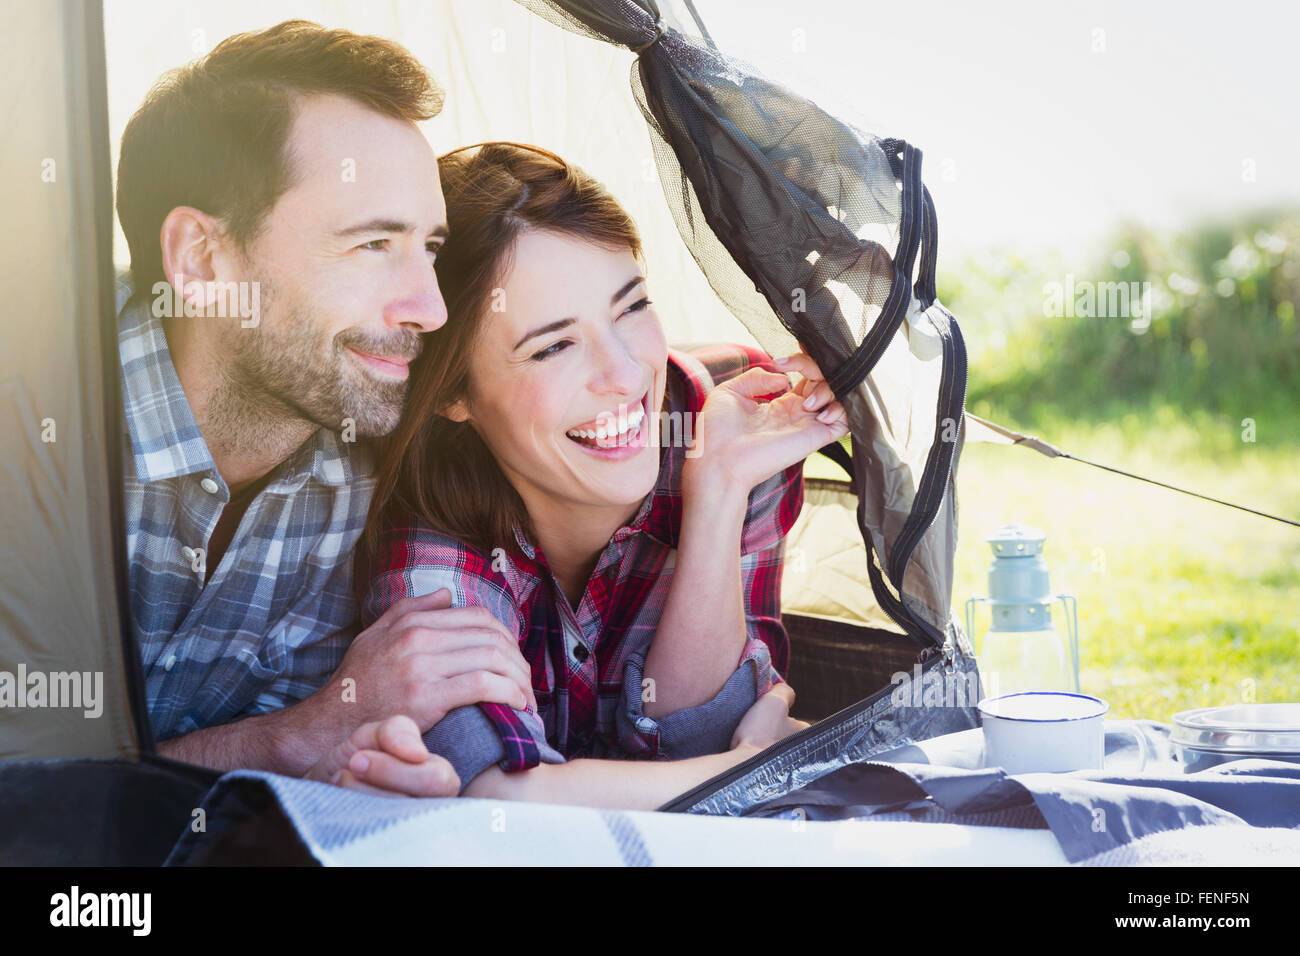 Smiling couple peering from inside tent Stock Photo